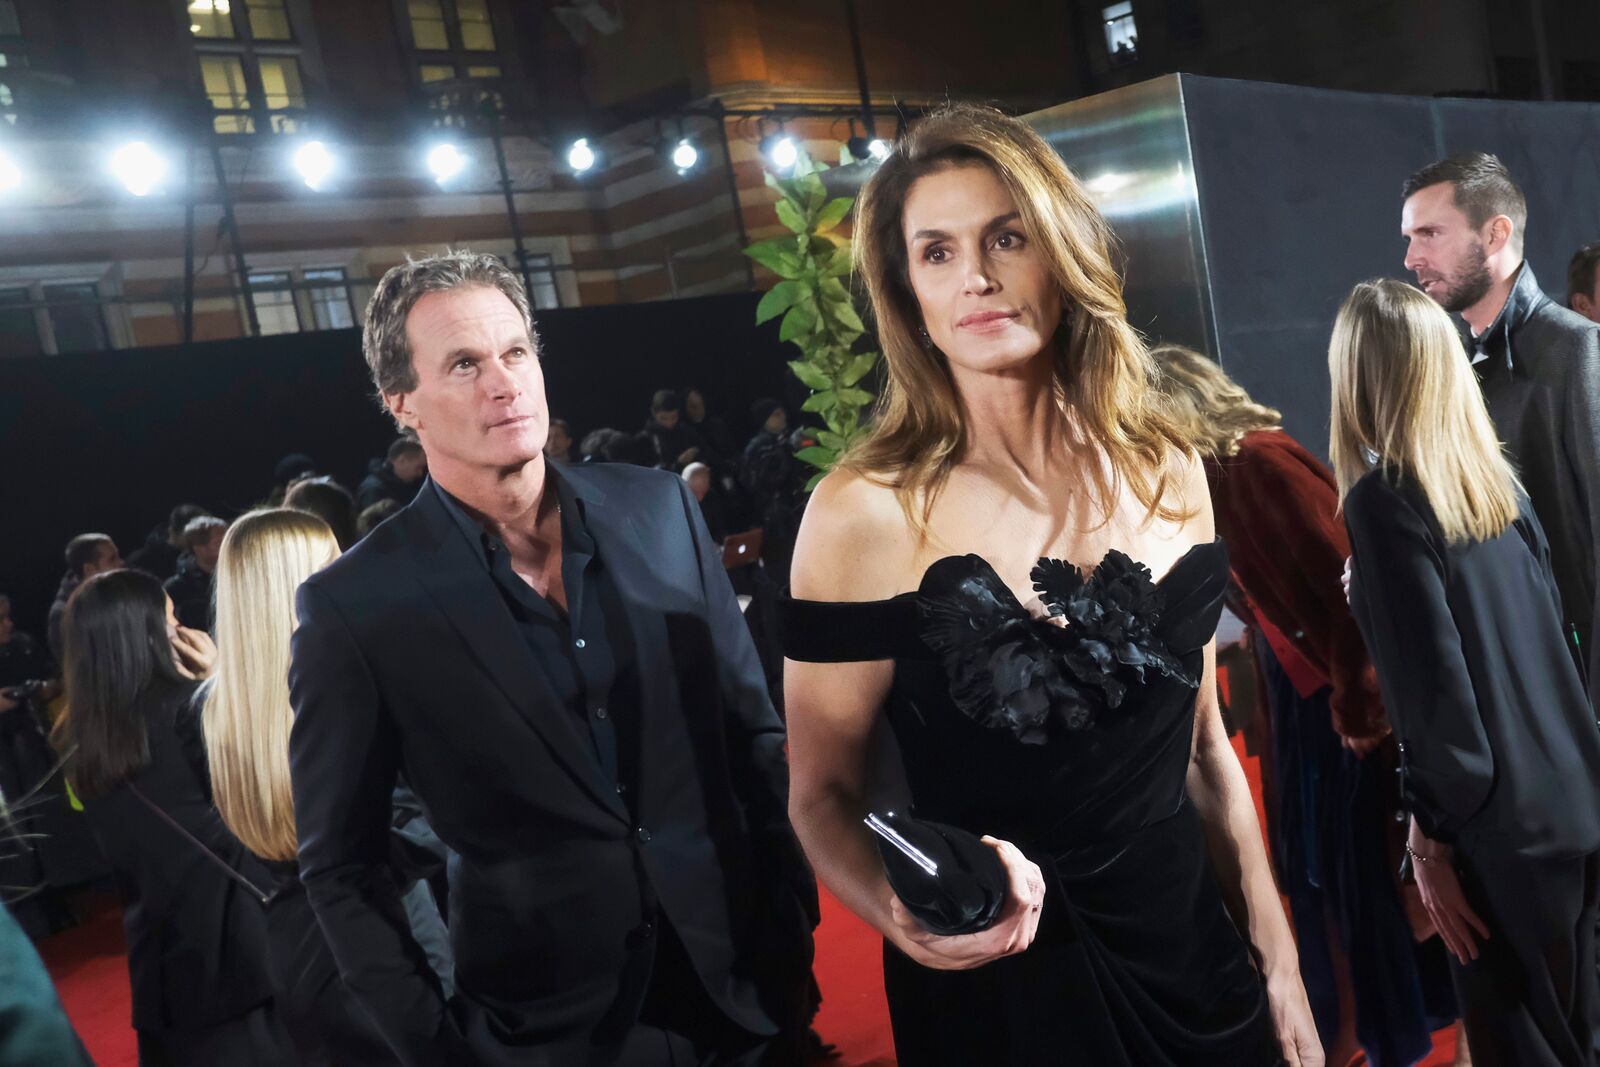 Randy Gerber and Cindy Crawford arrive at The Fashion Awards 2018. | Source: Getty Images